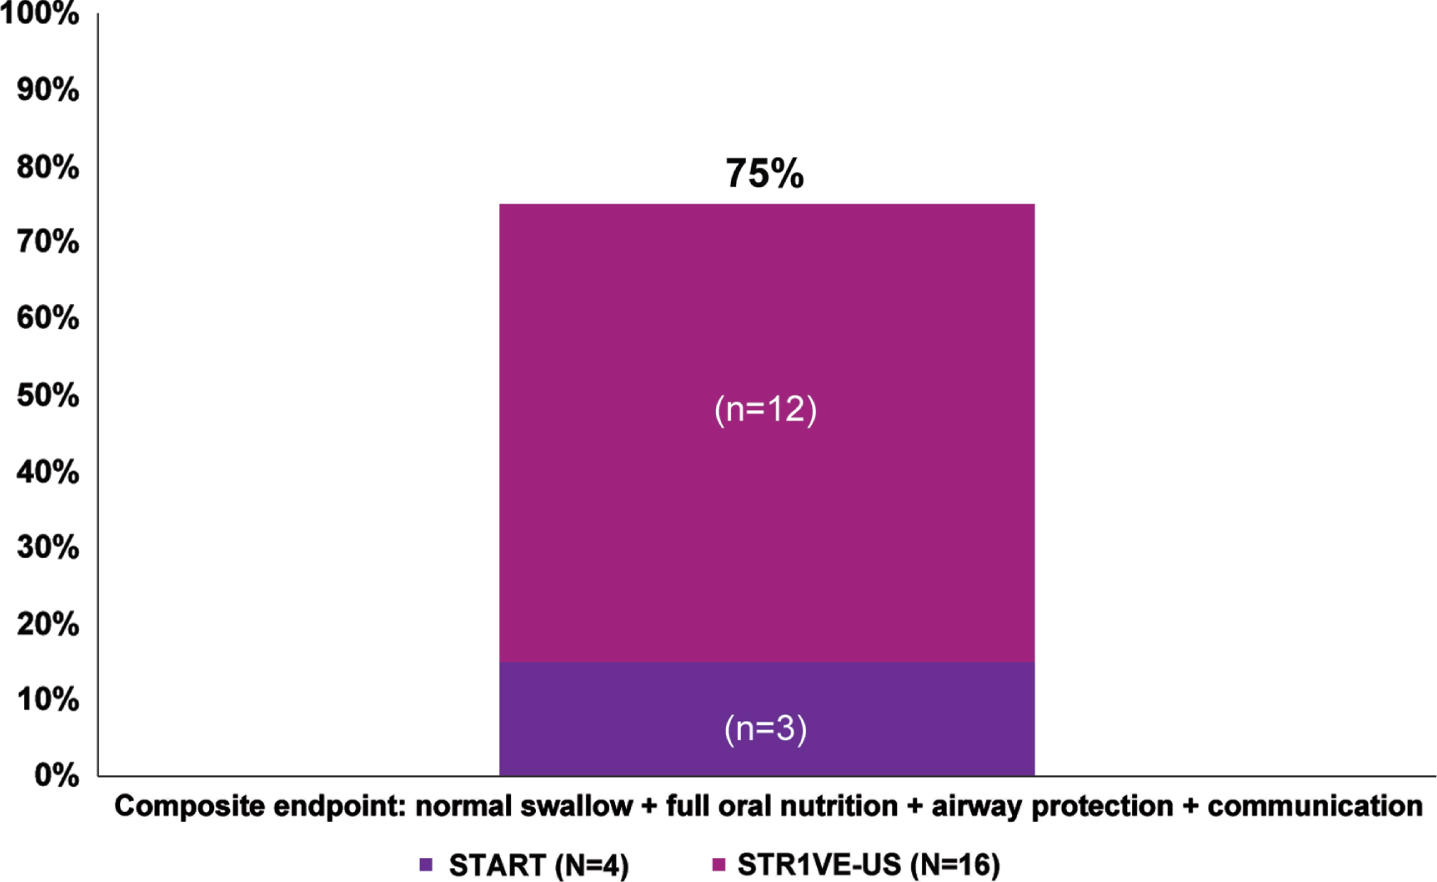 Percentage of patients meeting the composite endpointa representing bulbar function. aPercentages were calculated as a portion of patients with available data (N = 65 for swallow, nutrition, and airway protection; N = 20 for communication; N = 20 for composite endpoint). At baseline, communication was assessed for 20 native-English speaking patients in STR1VE-US who had a CHOP INTEND score of 60 or greater; communication was assessed before end of study for four patients in START and 16 in STR1VE-US.